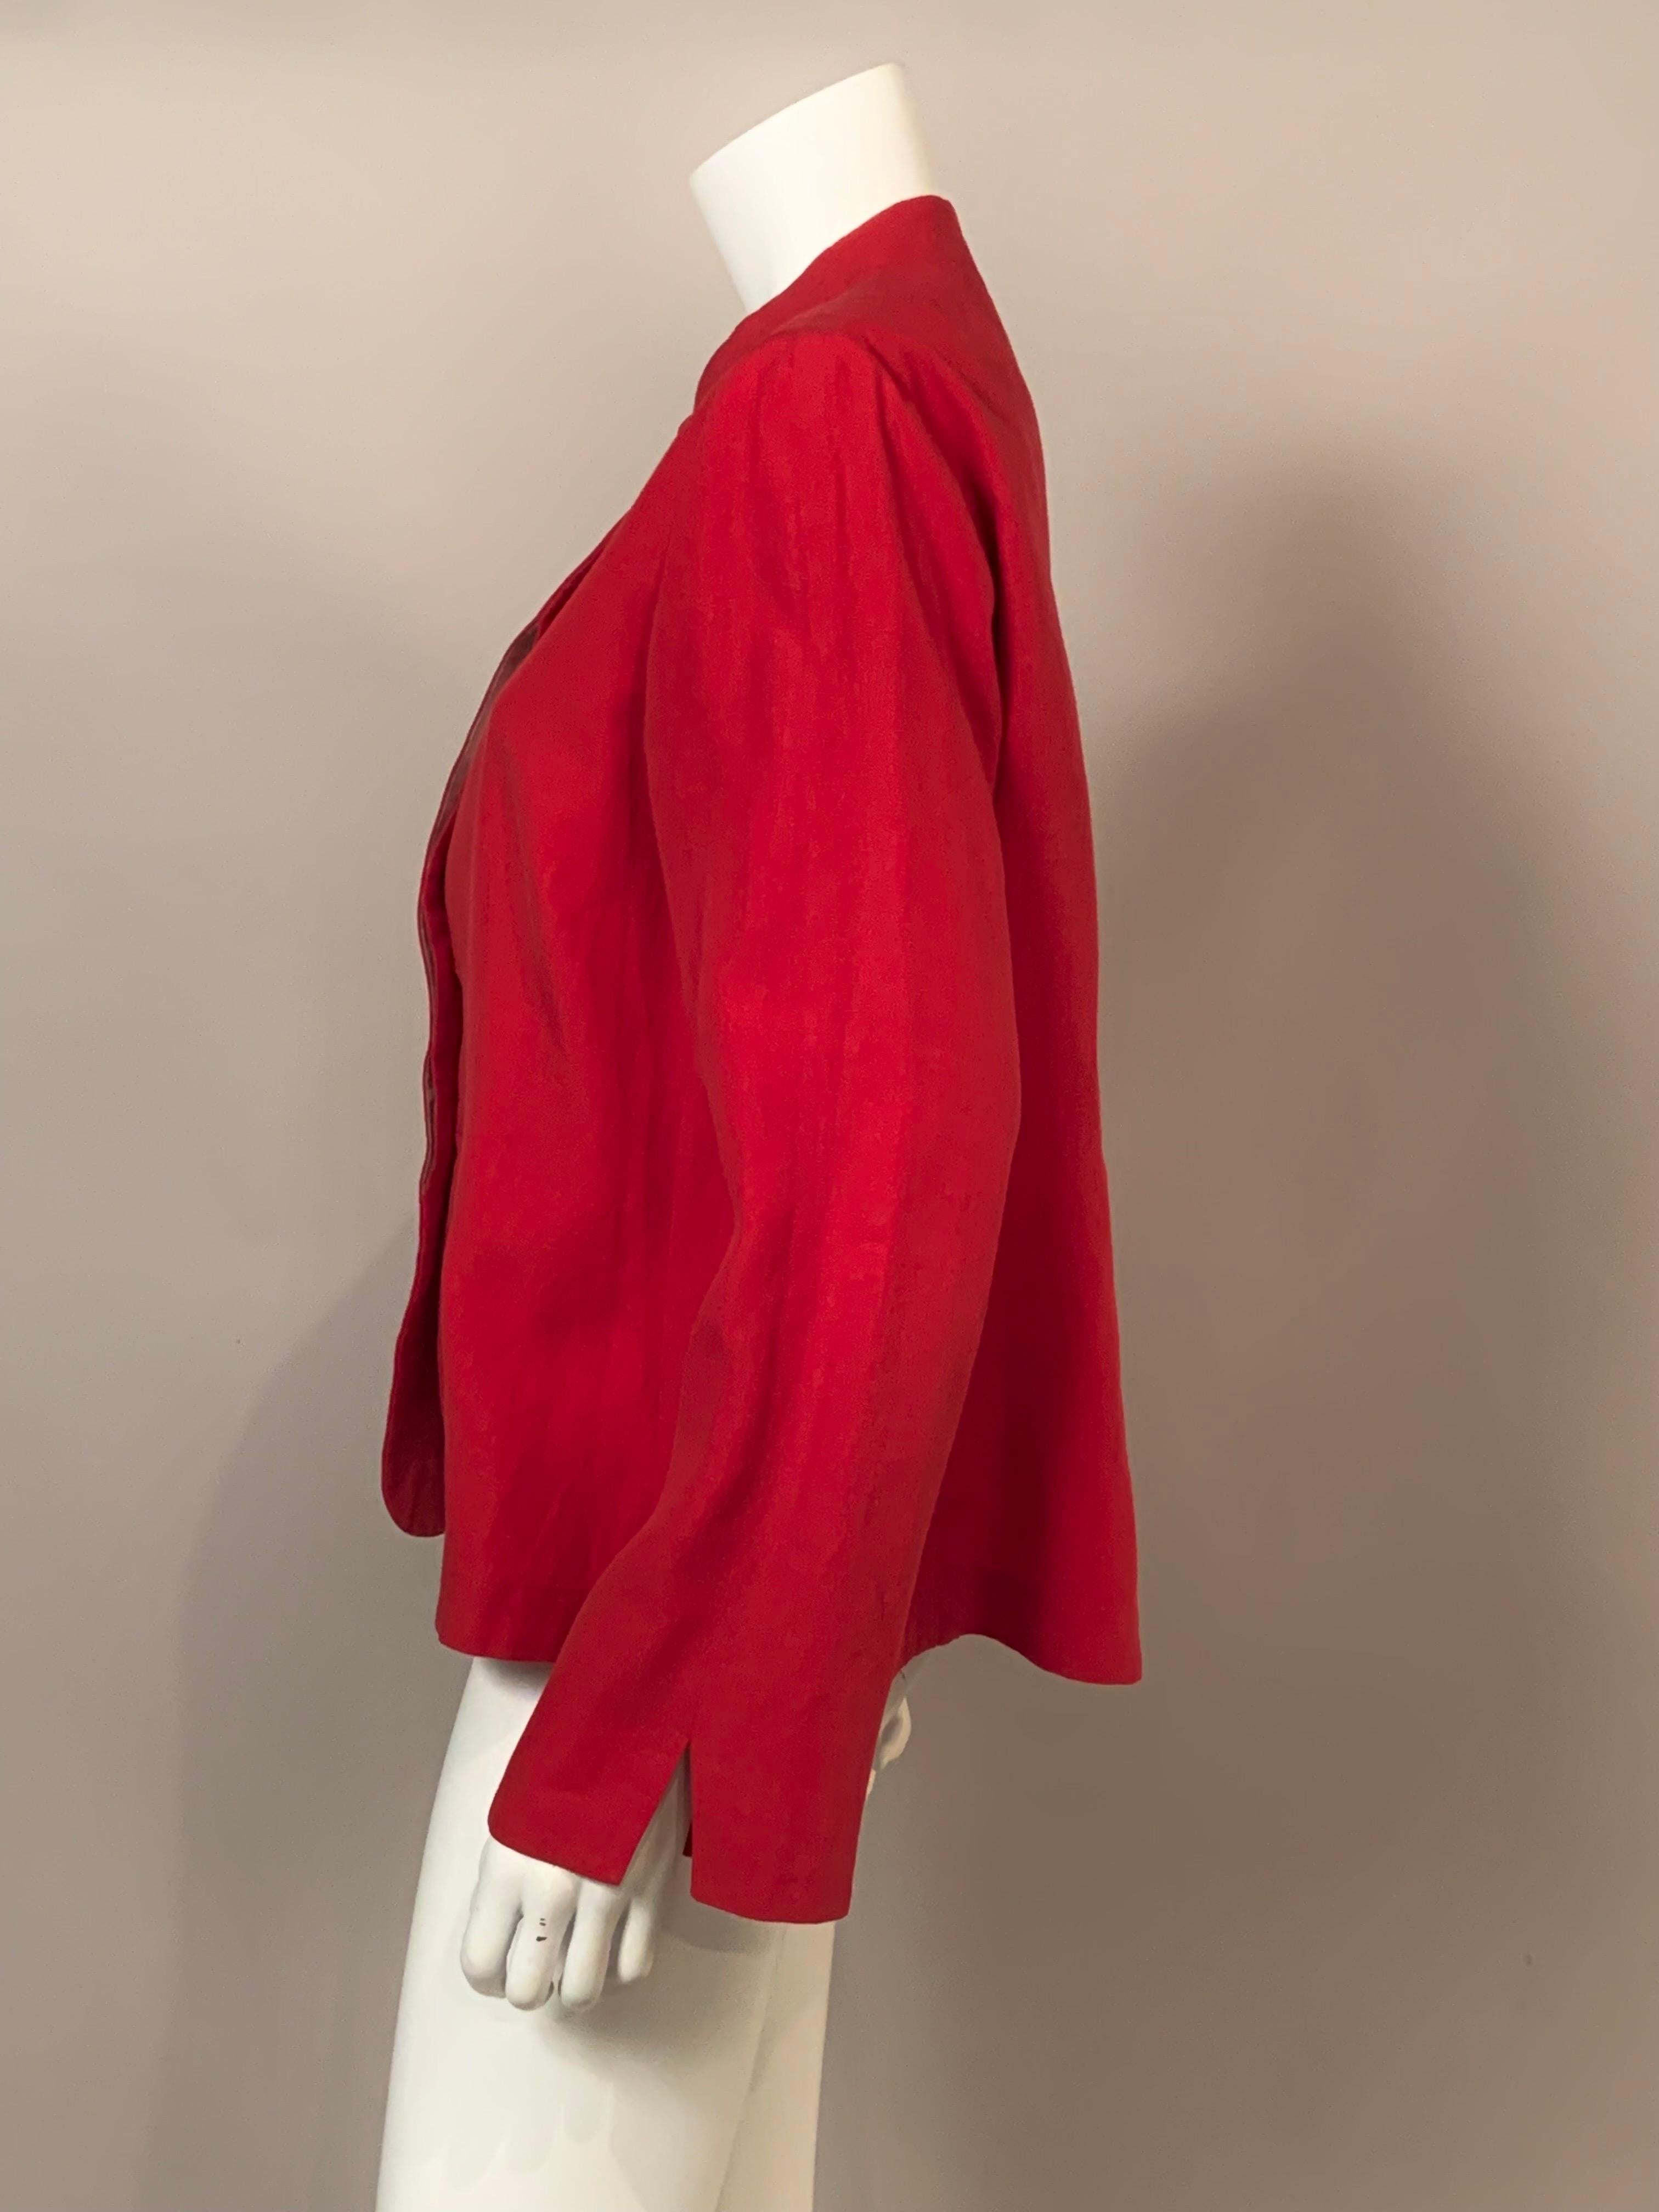 Giorgio Armani has designed this bright red linen jacket in the most classic and unadorned manner.  There is a Nehru style collar, hidden buttons at the center front inside a red and white striped button placket, which matches the partial lining in